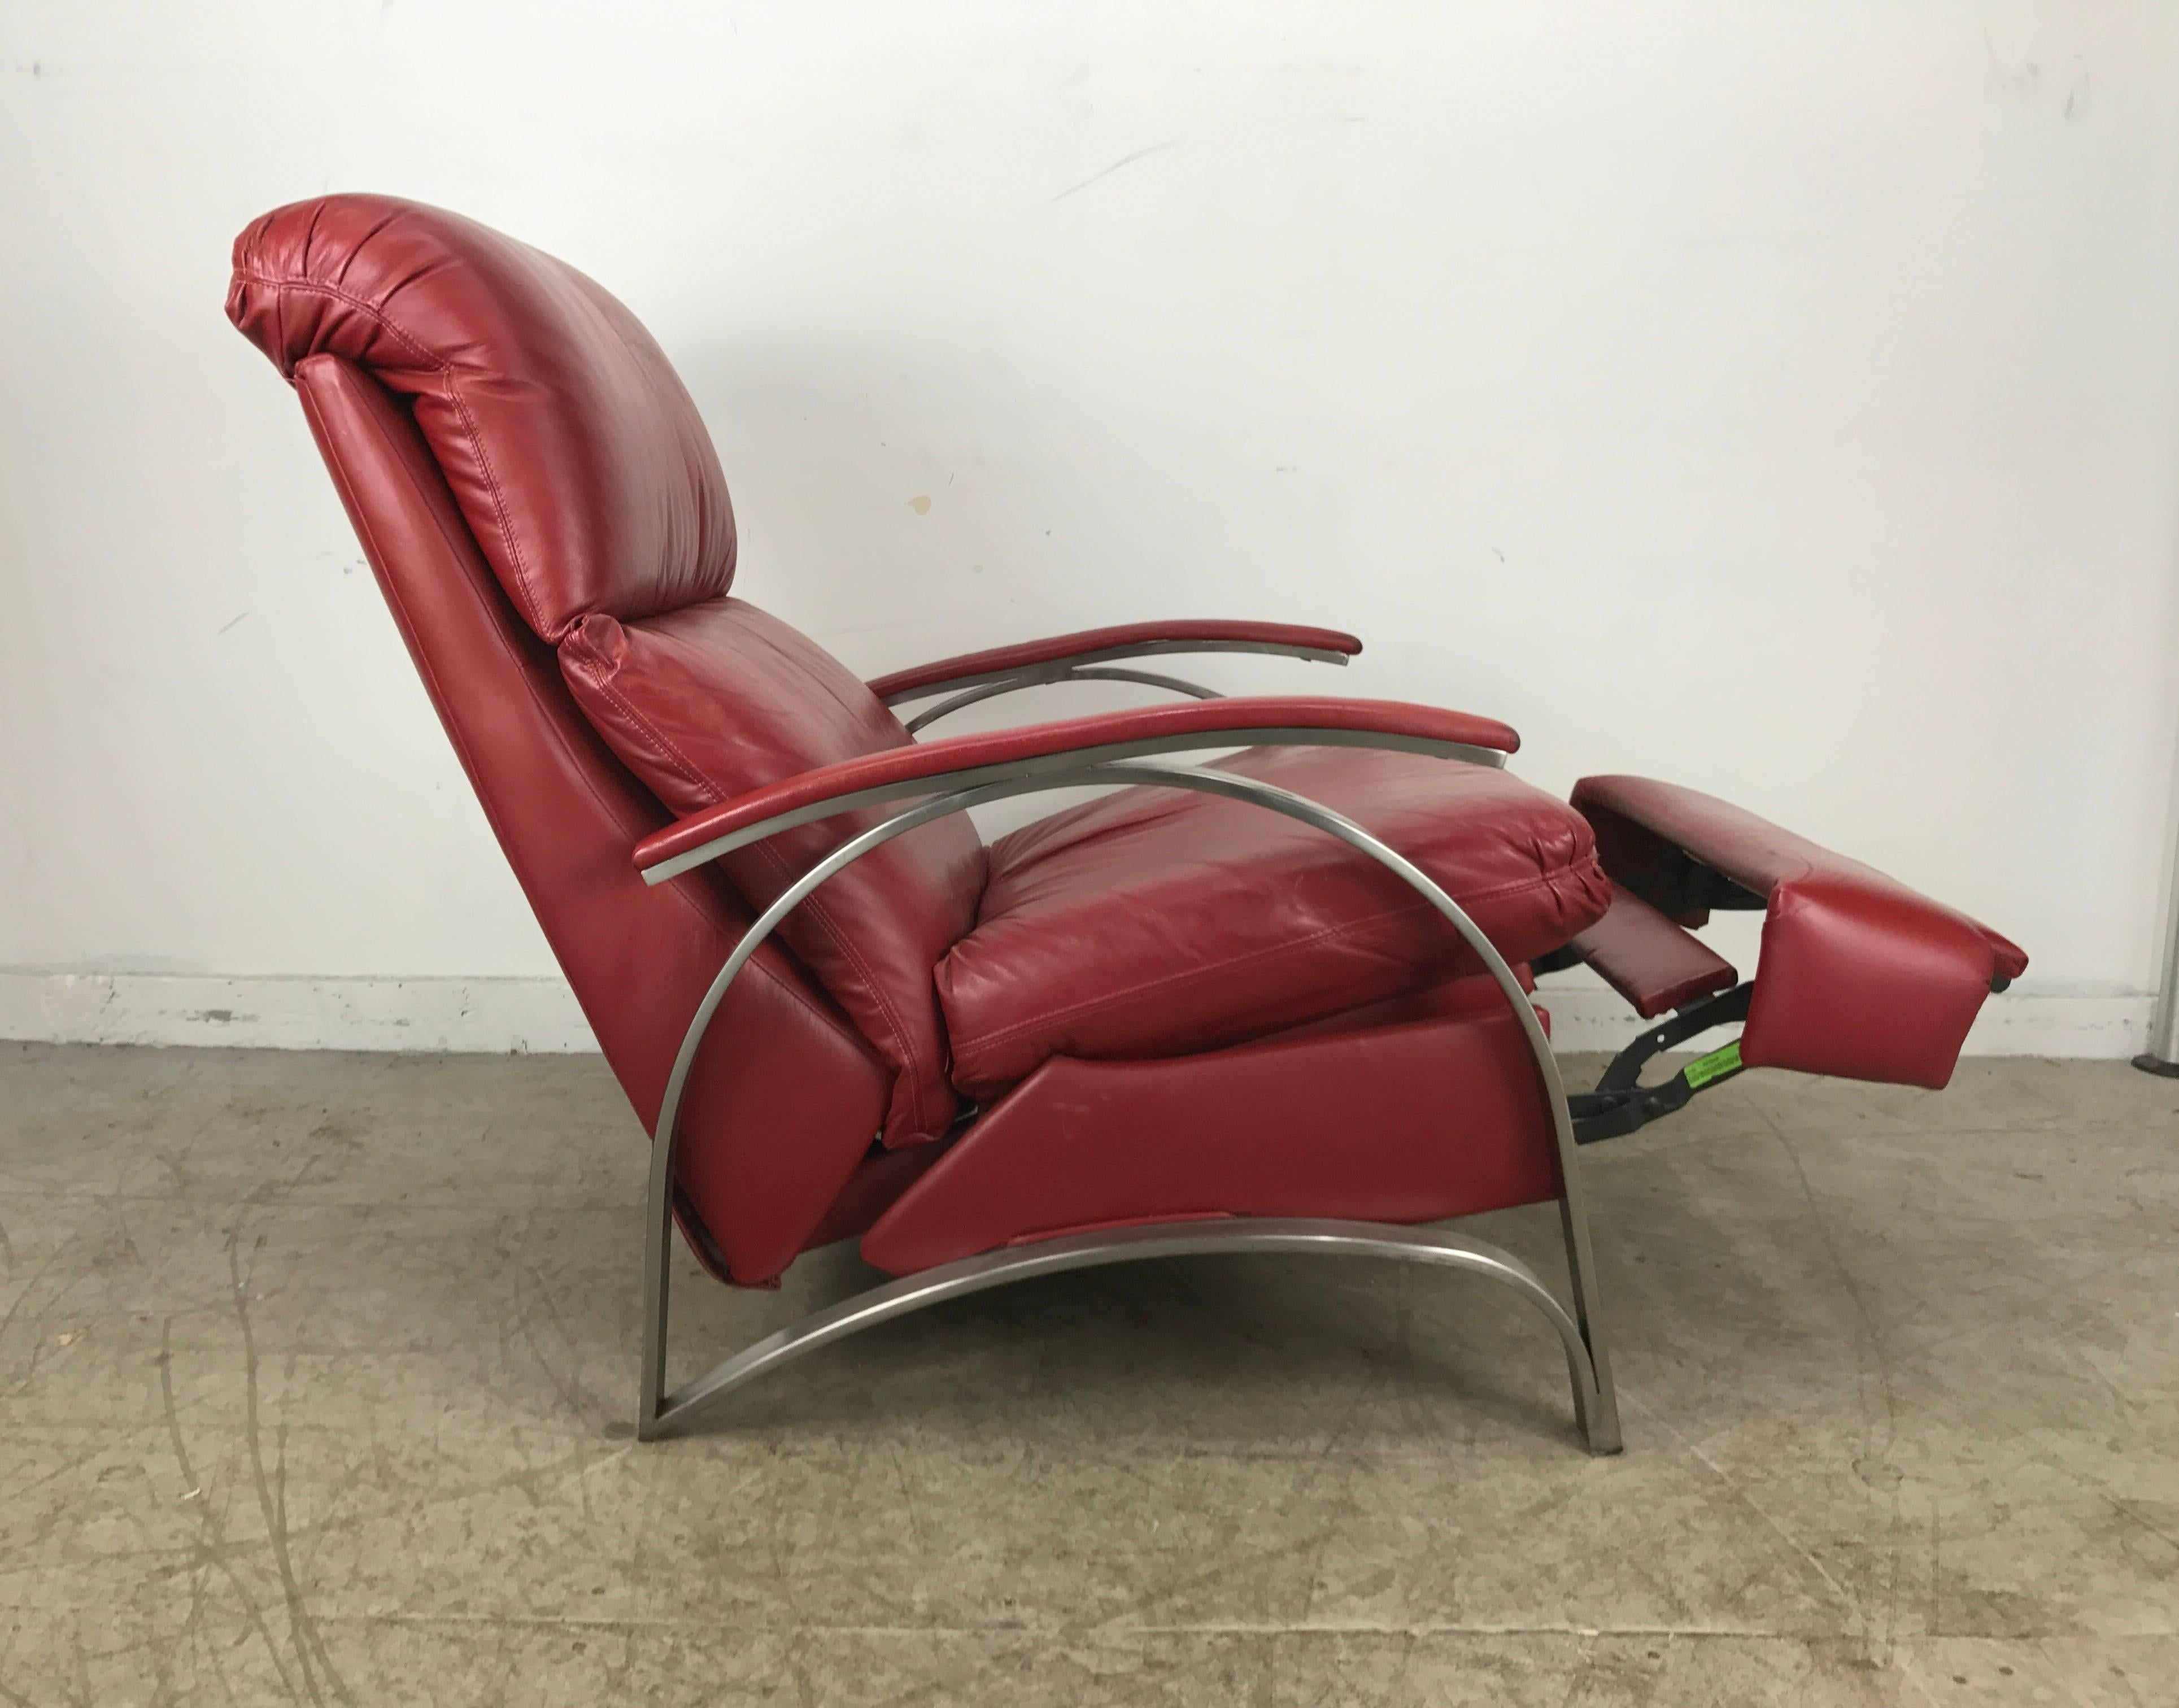 Contemporary red leather and chrome three position reclining lounge chair manufactured by Barcalounger, superior quality and construction, Extremely comfortable, hand delivery available to New York City or anywhere en route from Buffalo ny.